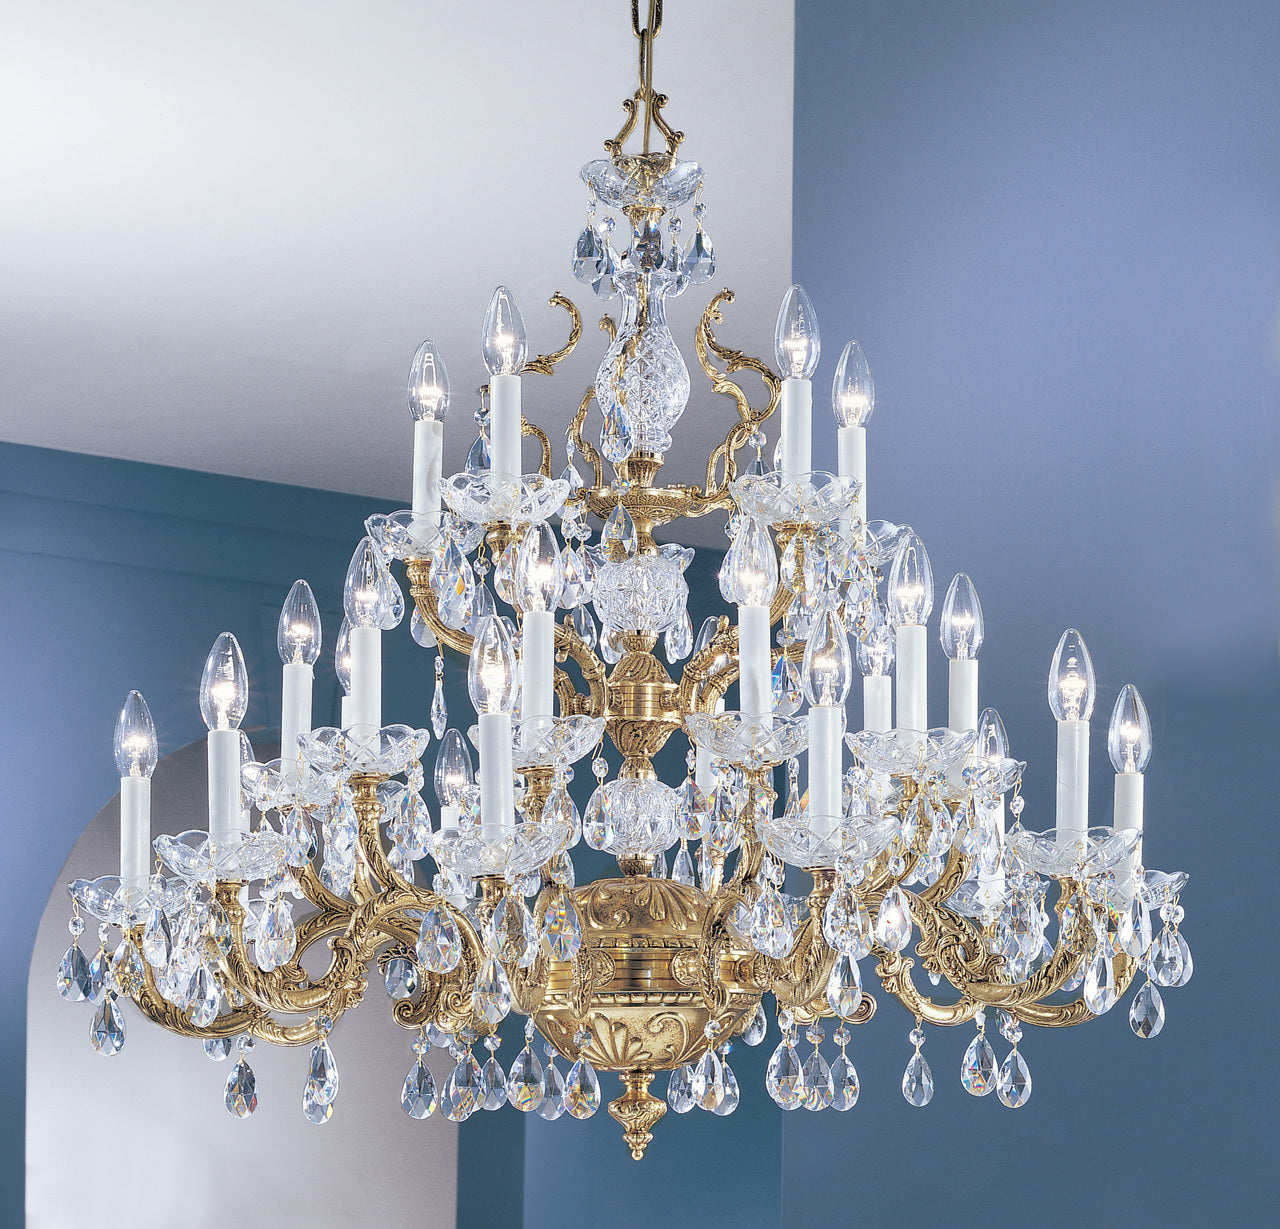 Classic Lighting 5535 RB C Madrid Crystal/Cast Brass Chandelier in Roman Bronze (Imported from Spain)